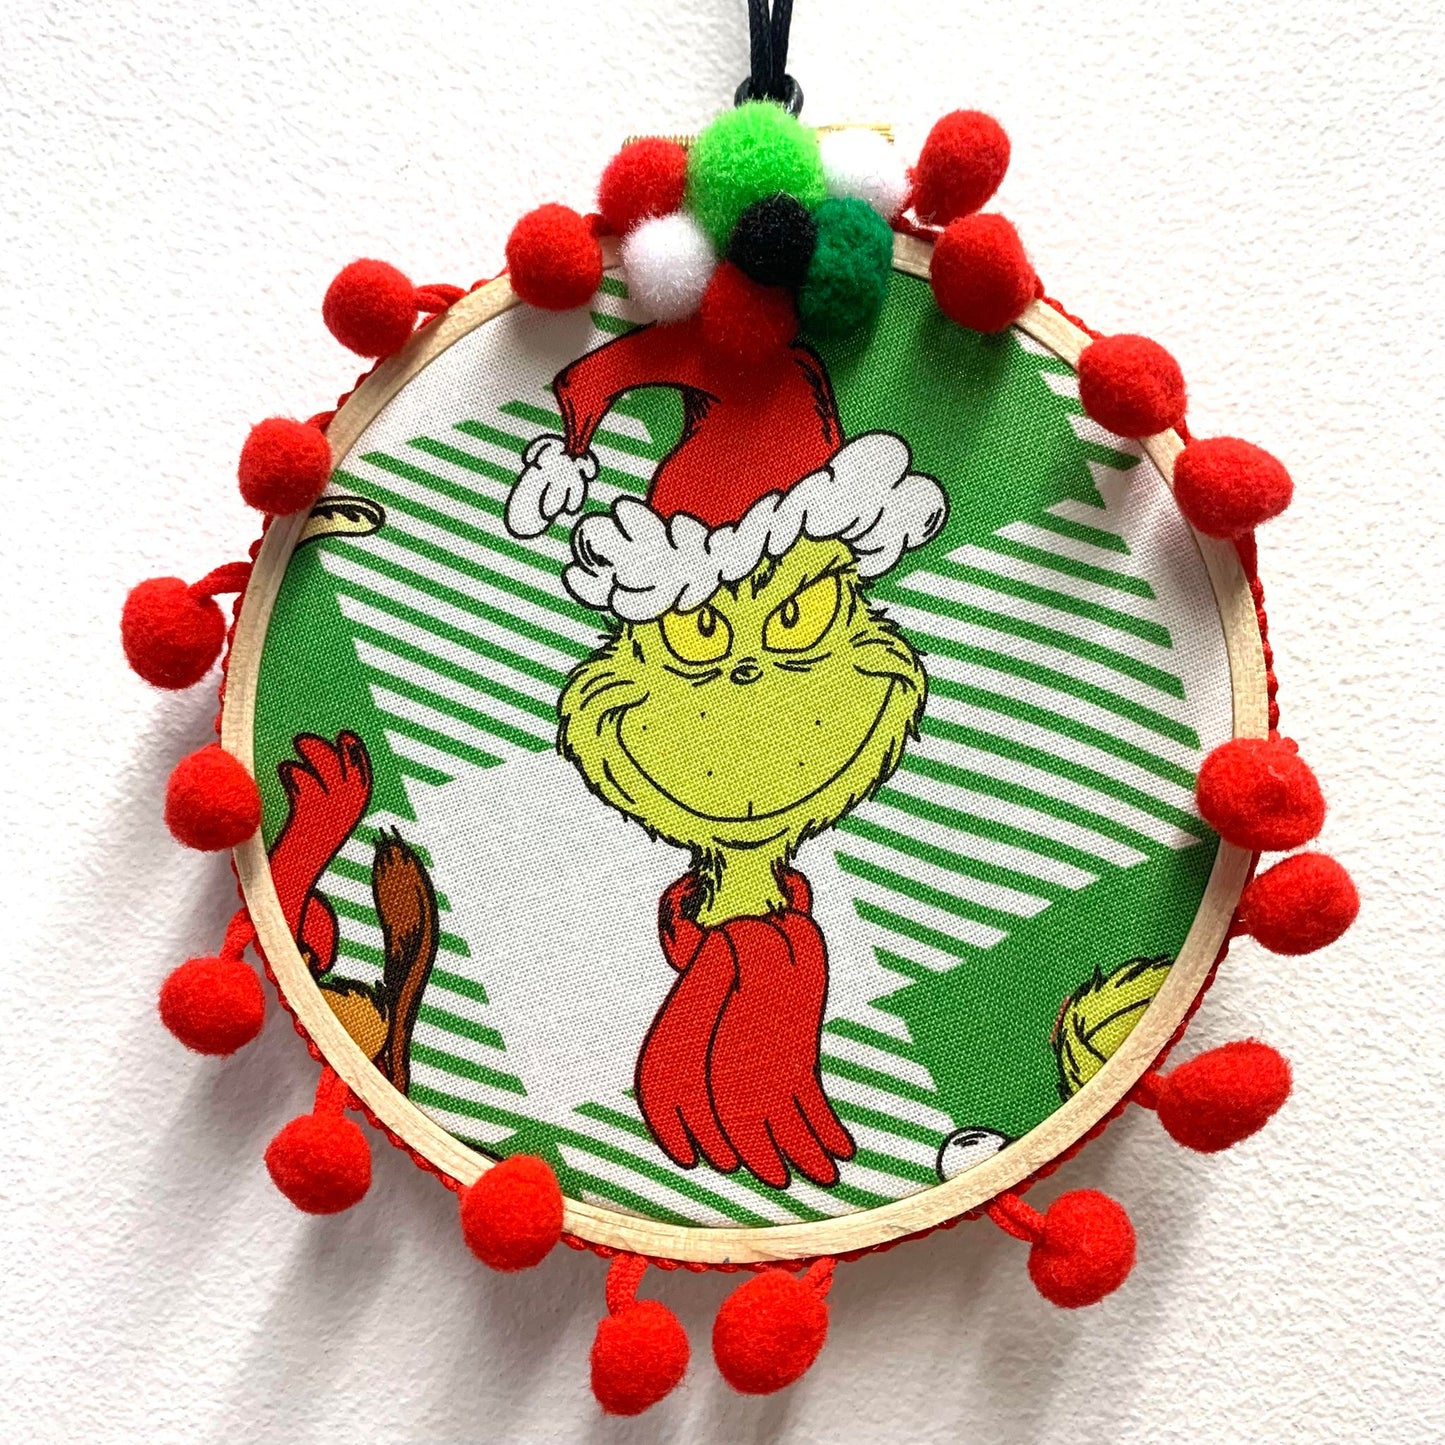 THIS BIRD HAS FLOWN- "The Grinch" Small Embroidery Hoop Christmas Decoration